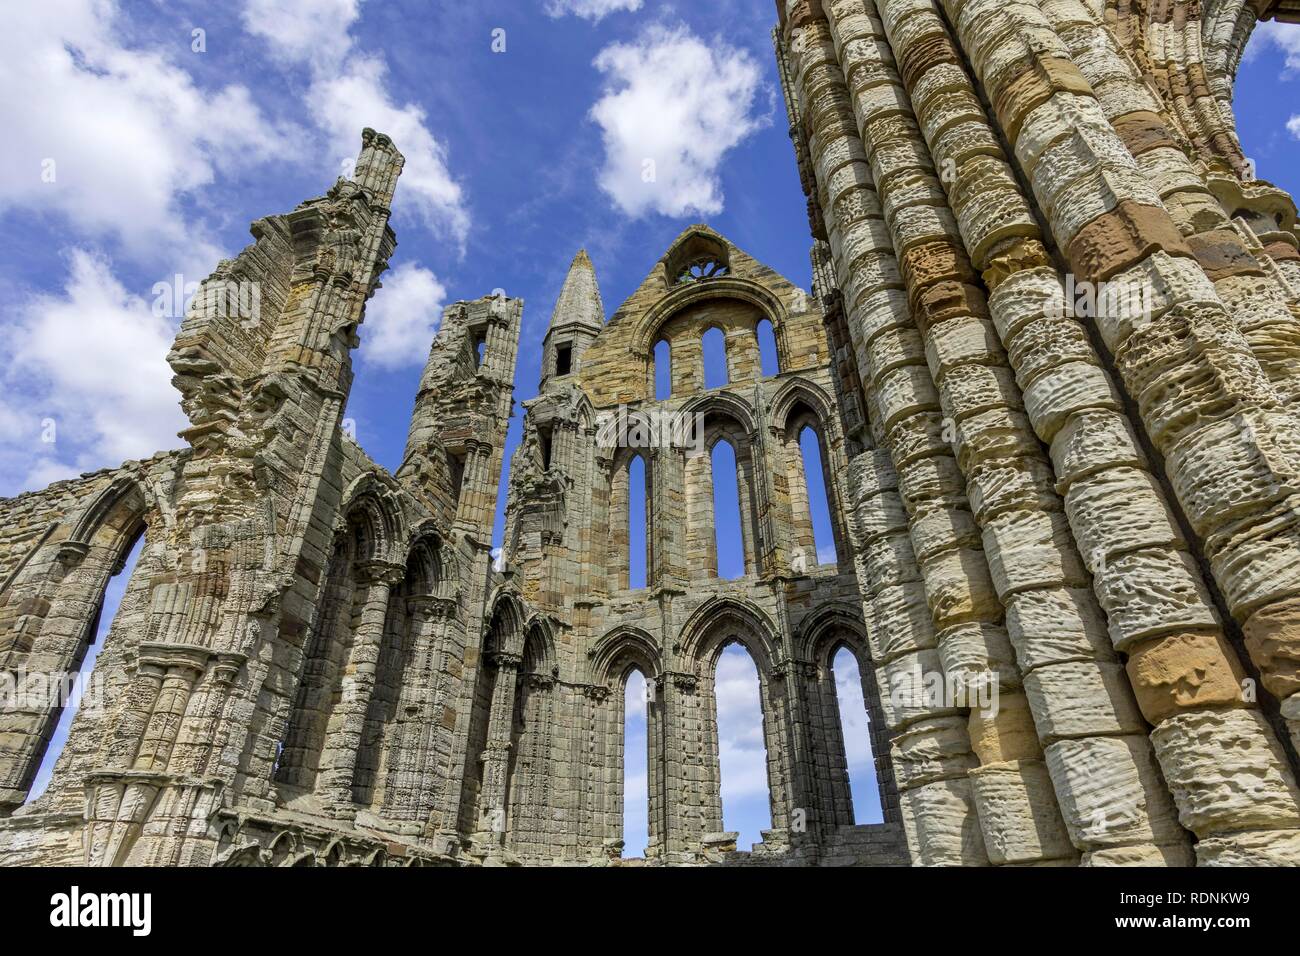 Ruin of the Abbey of Whitby, England, United Kingdom Stock Photo